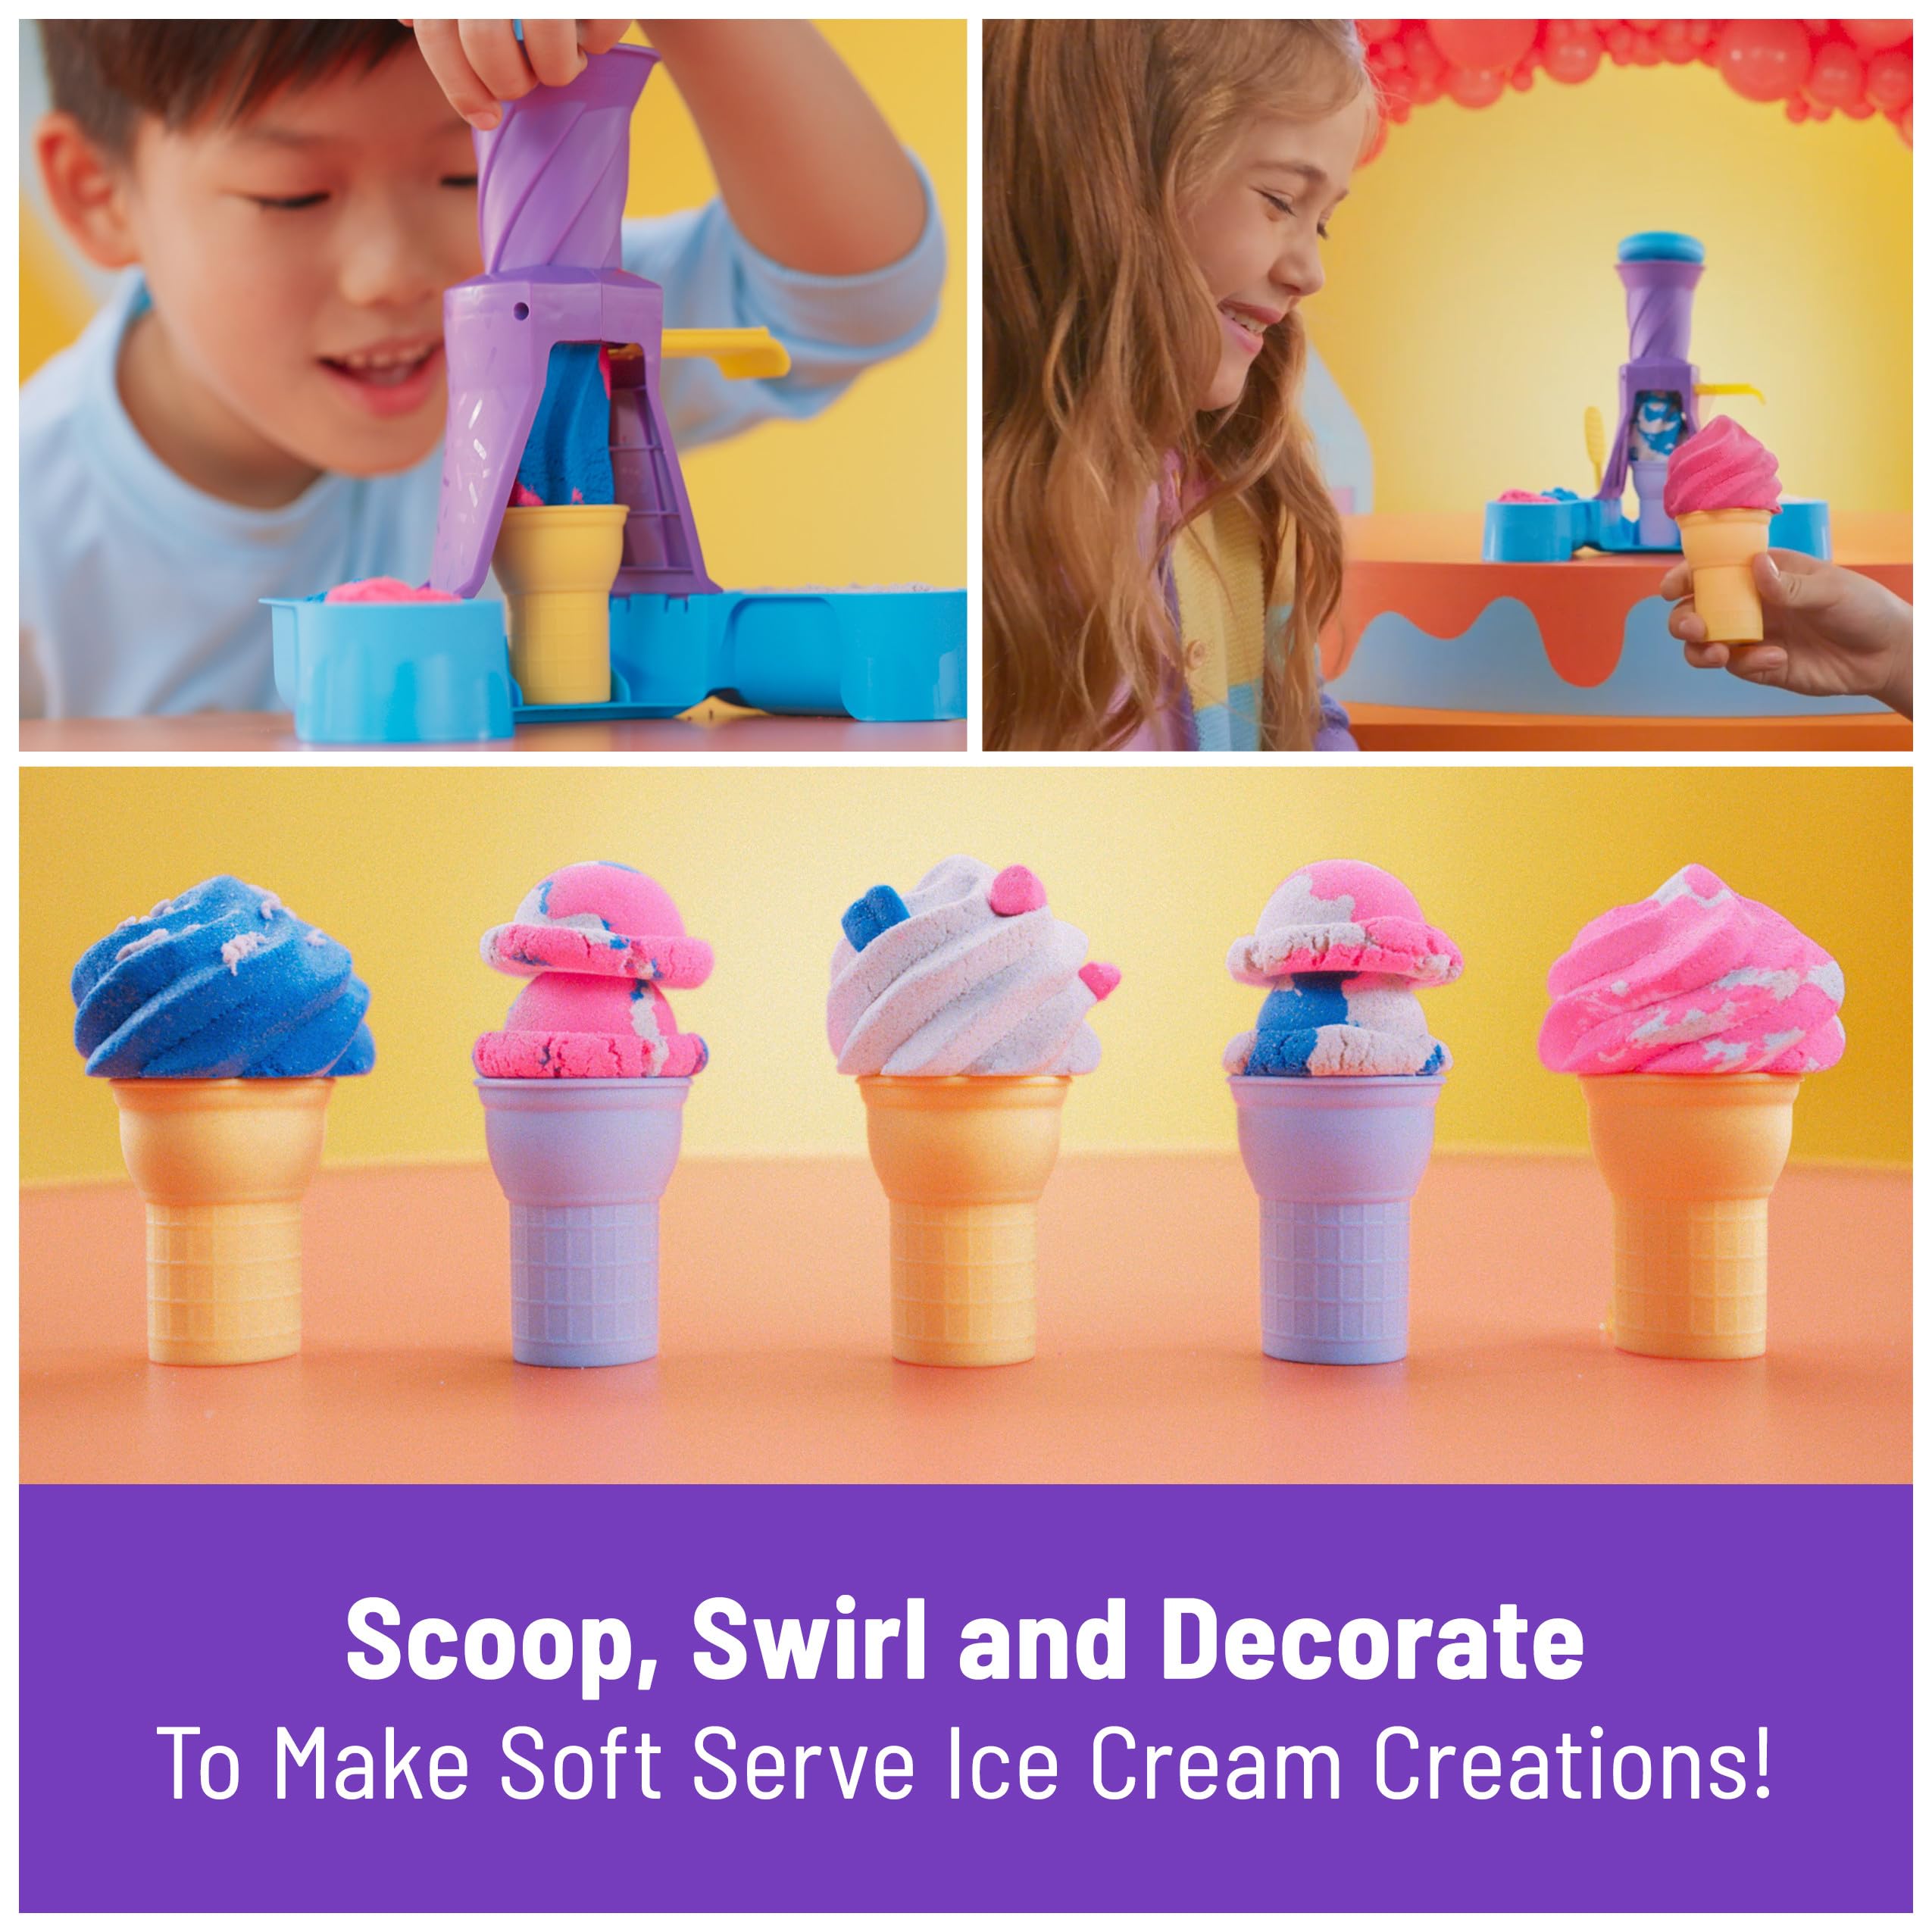 Kinetic Sand, Soft Serve Station with 14oz of Play Sand (Blue, Pink and White), 2 Ice Cream Cones and 2 Tools, Sensory Toys for Kids Aged 5 and up